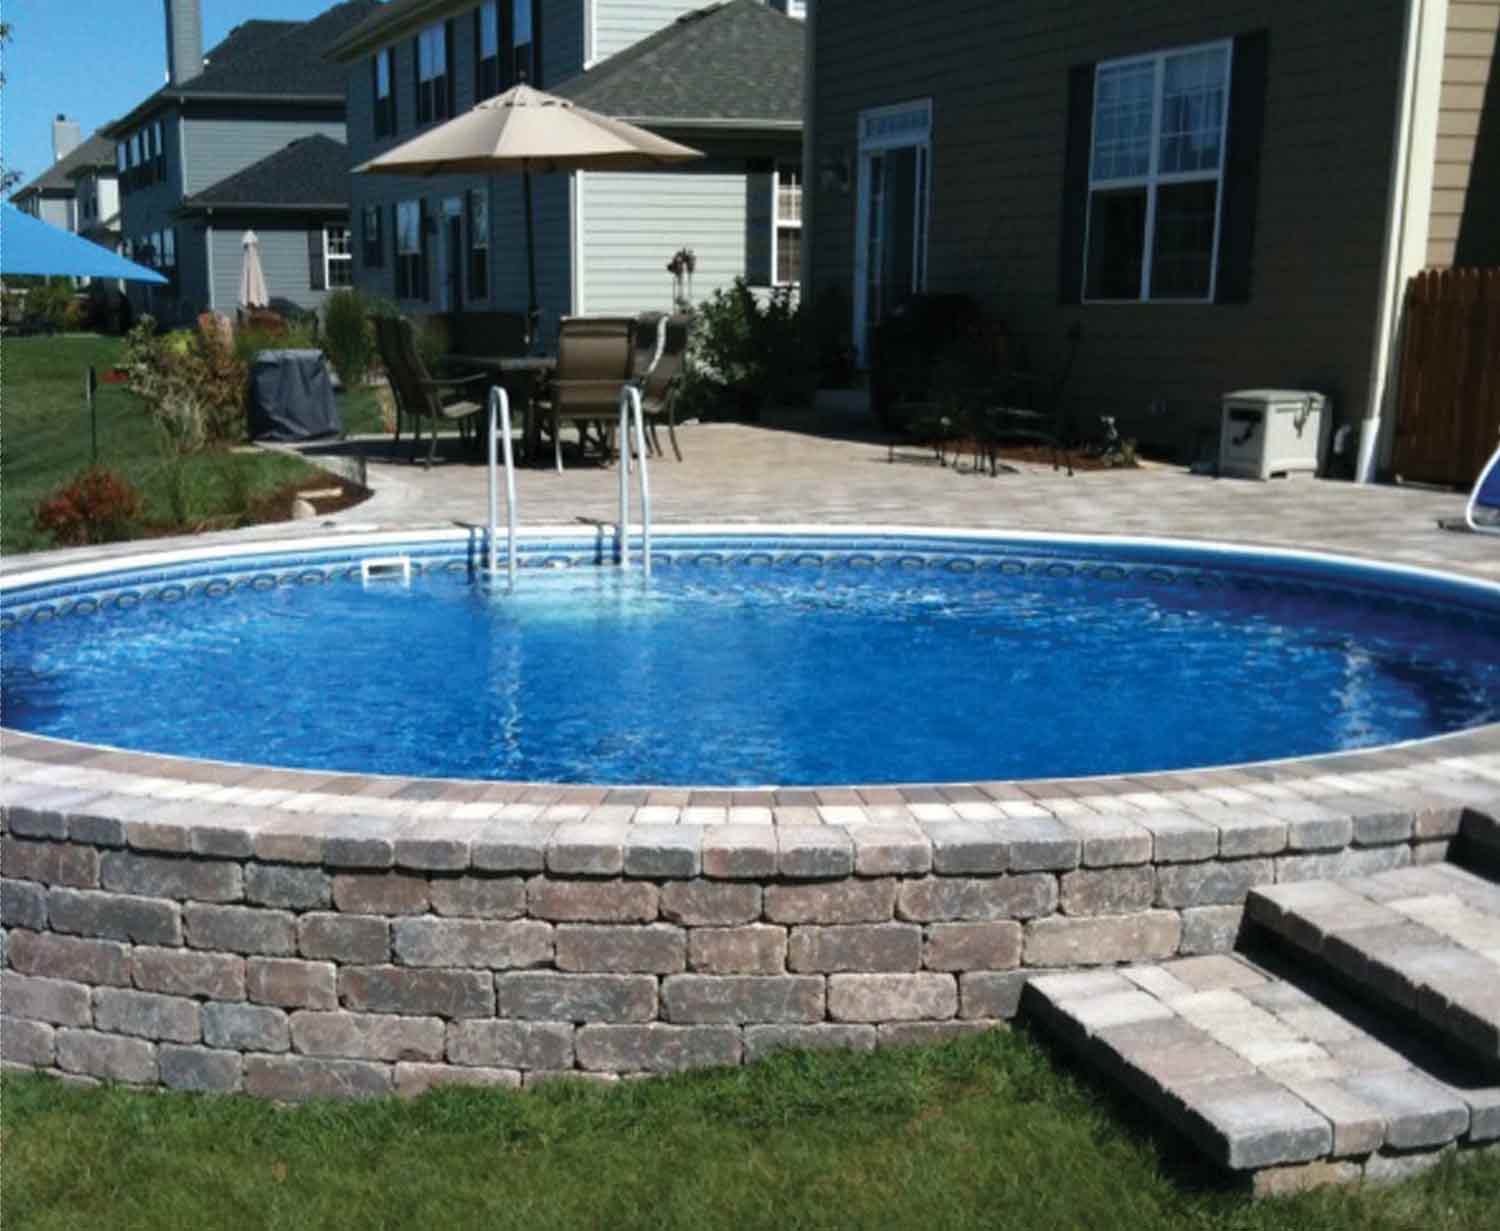 Can An Above Ground Swimming Pool Look, Can Above Ground Pools Look Nice